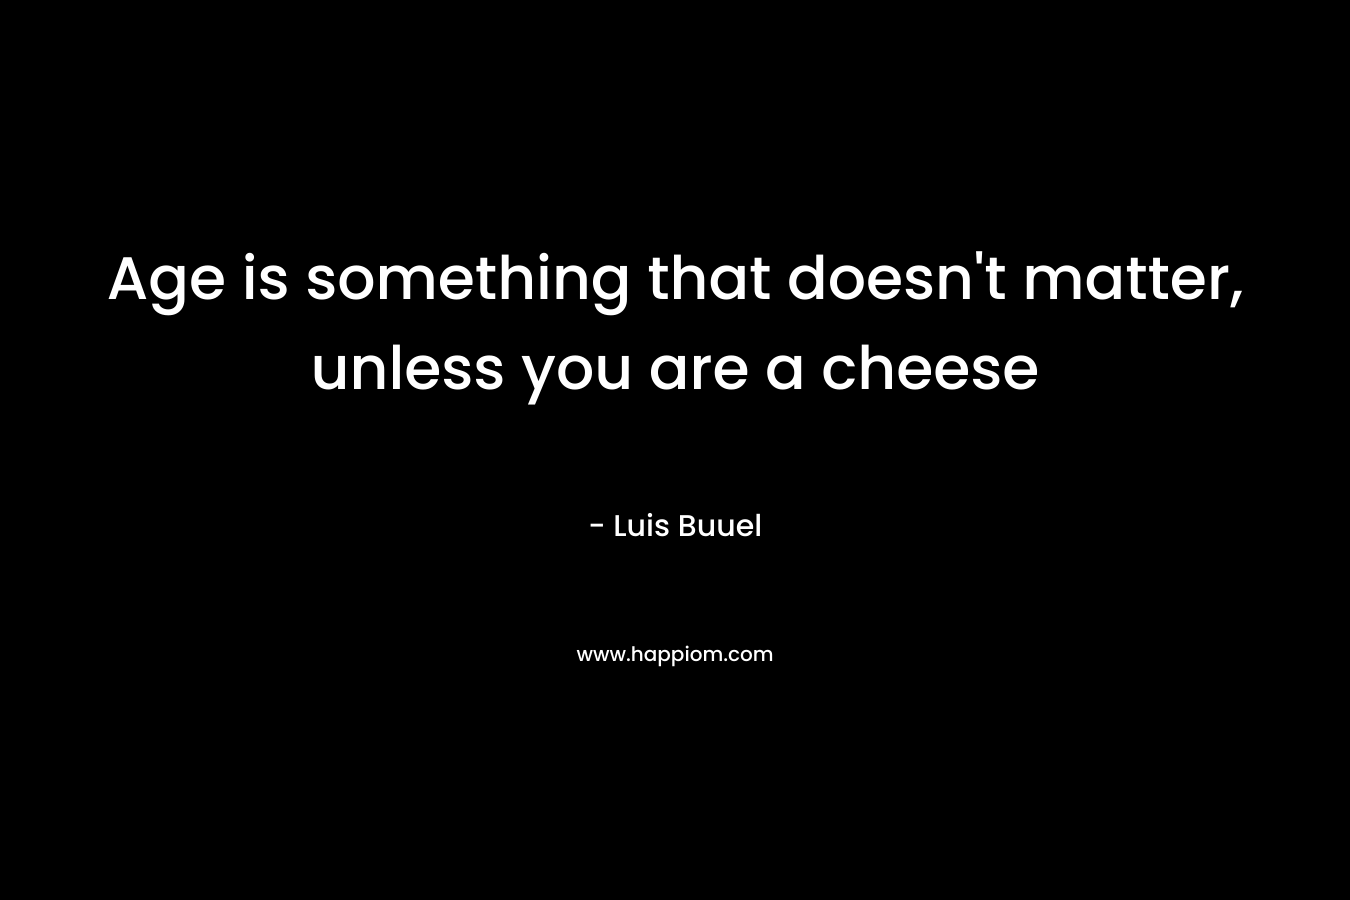 Age is something that doesn't matter, unless you are a cheese